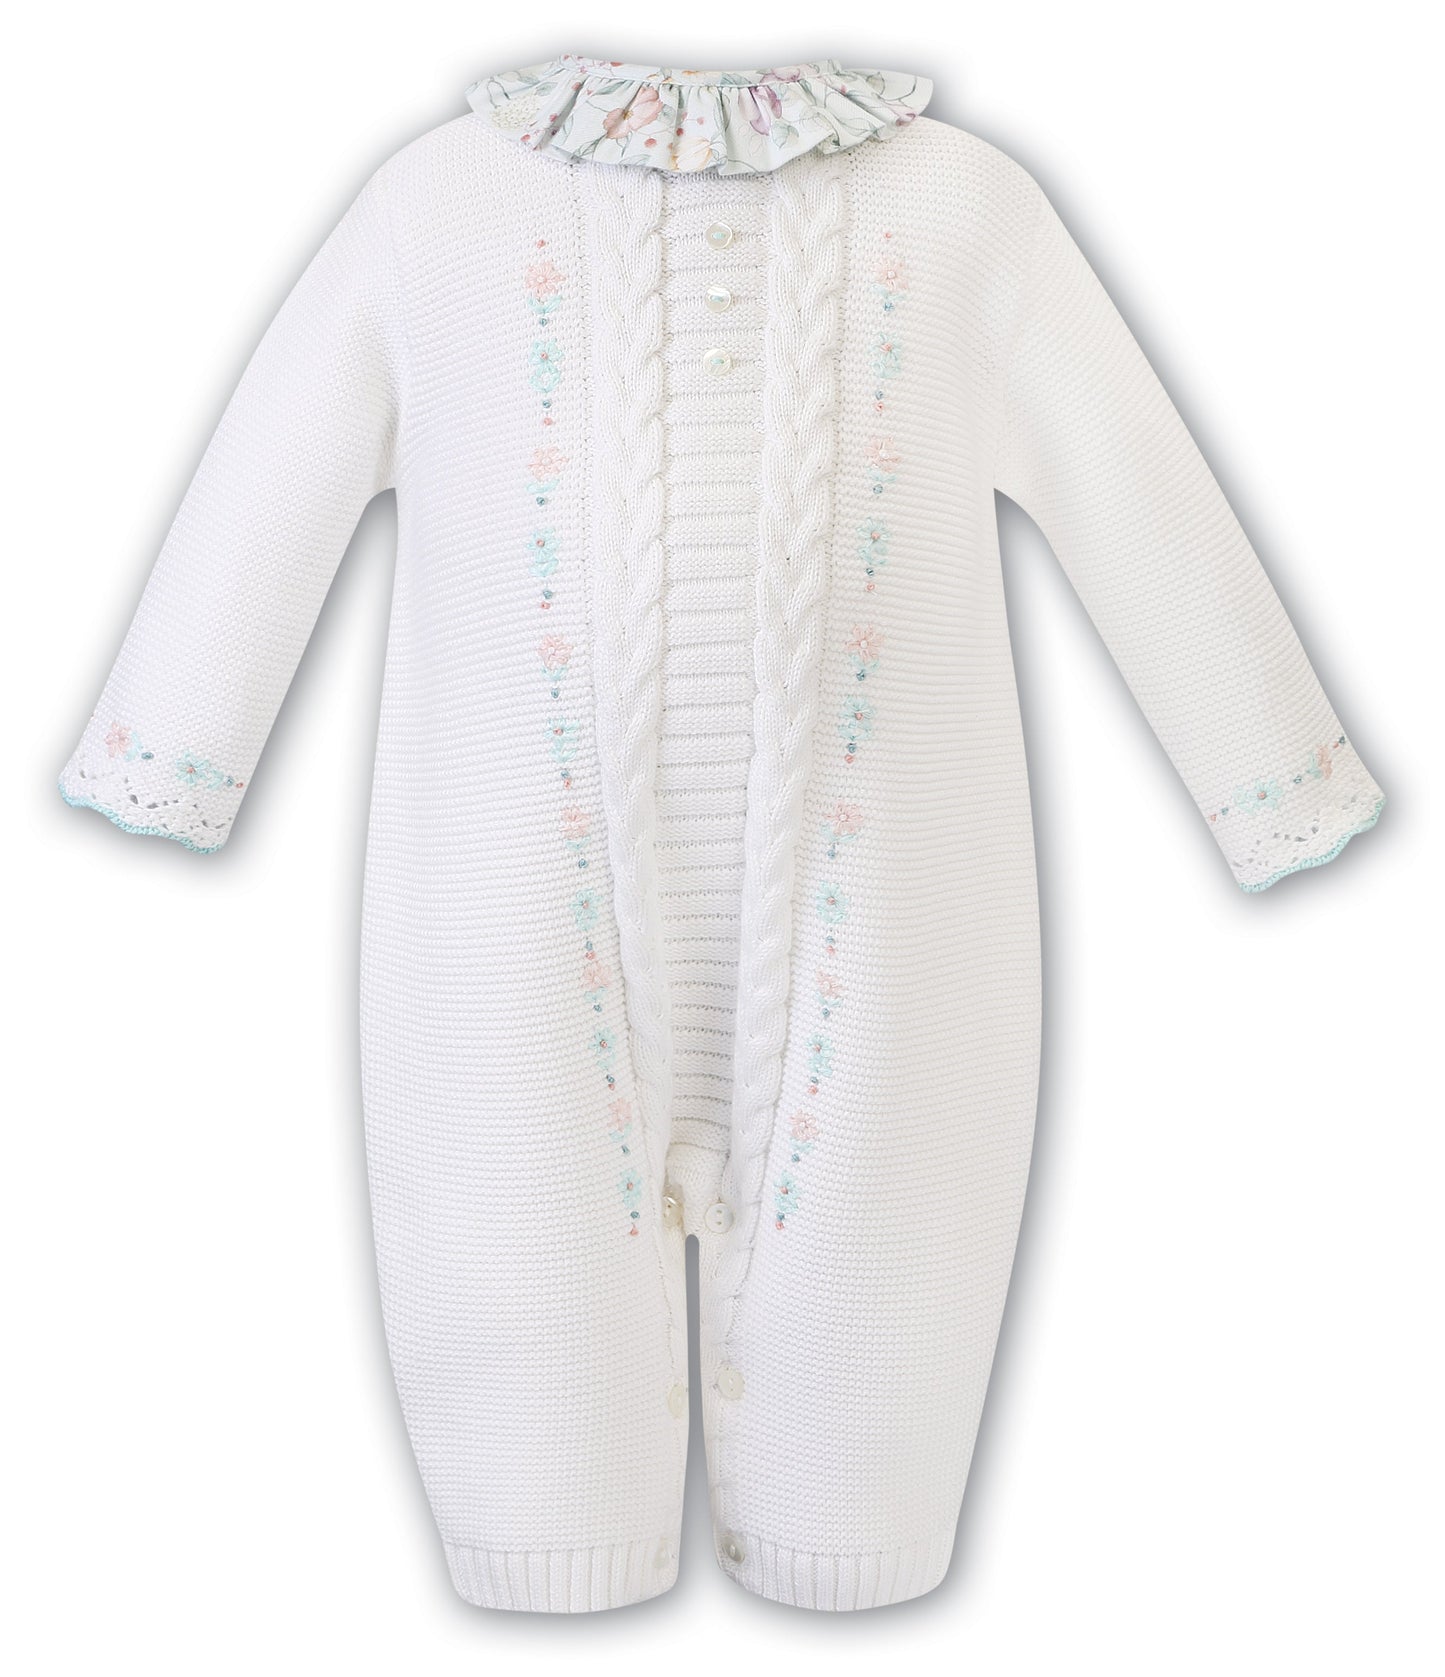 SARAH LOUISE Ivory & Mint Baby Girls Knitted Romper - NON RETURNABLE